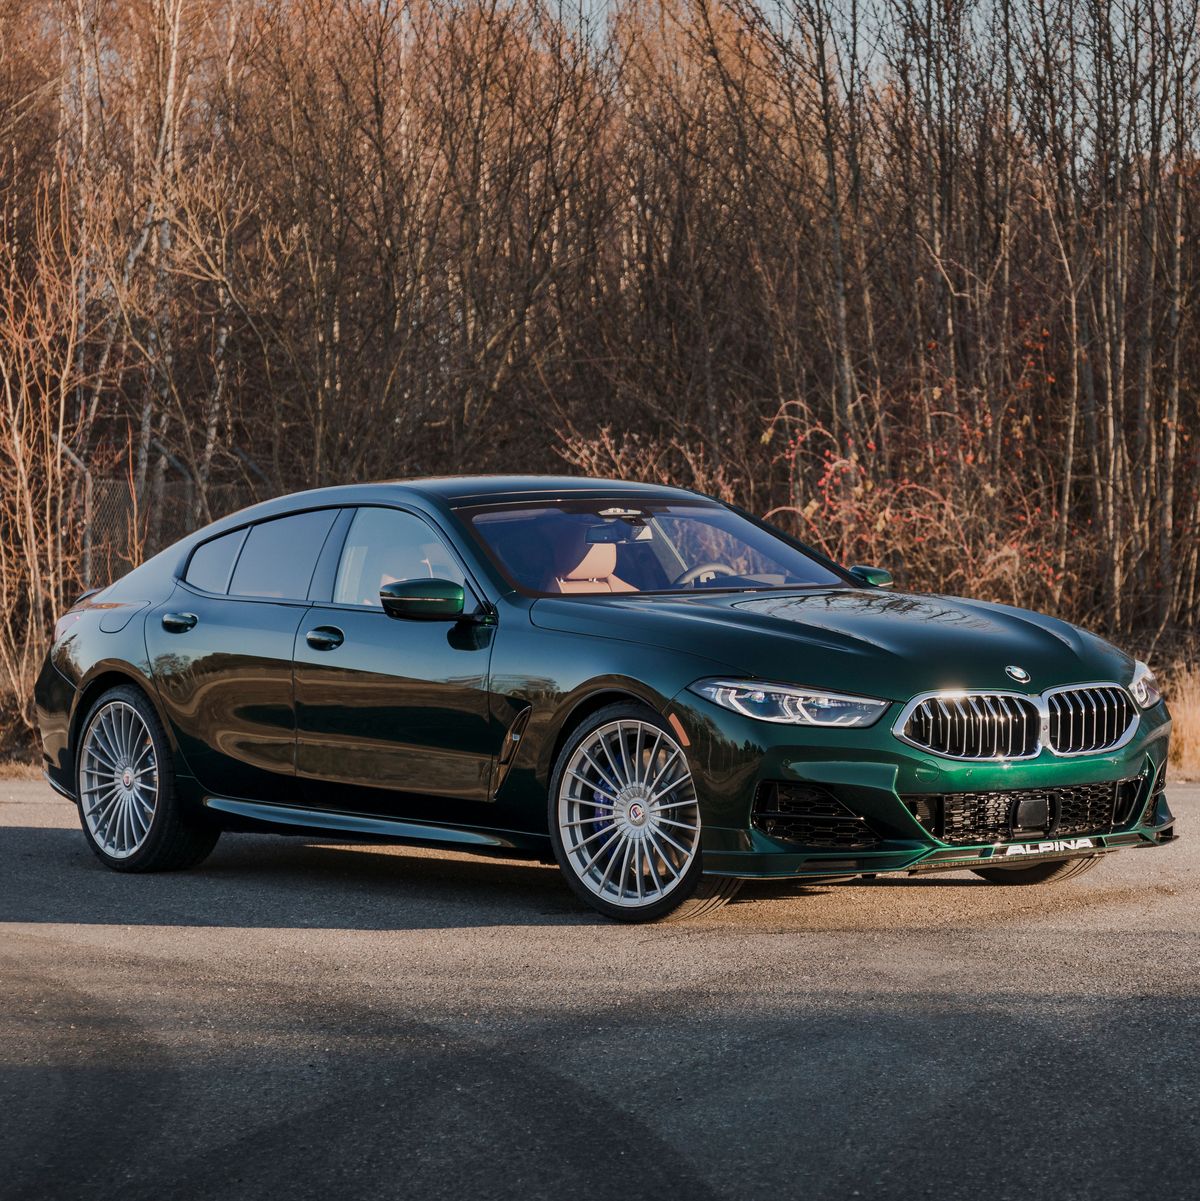 2022 BMW Alpina B8 Gran Coupe Combines the 8-Series' Best Elements